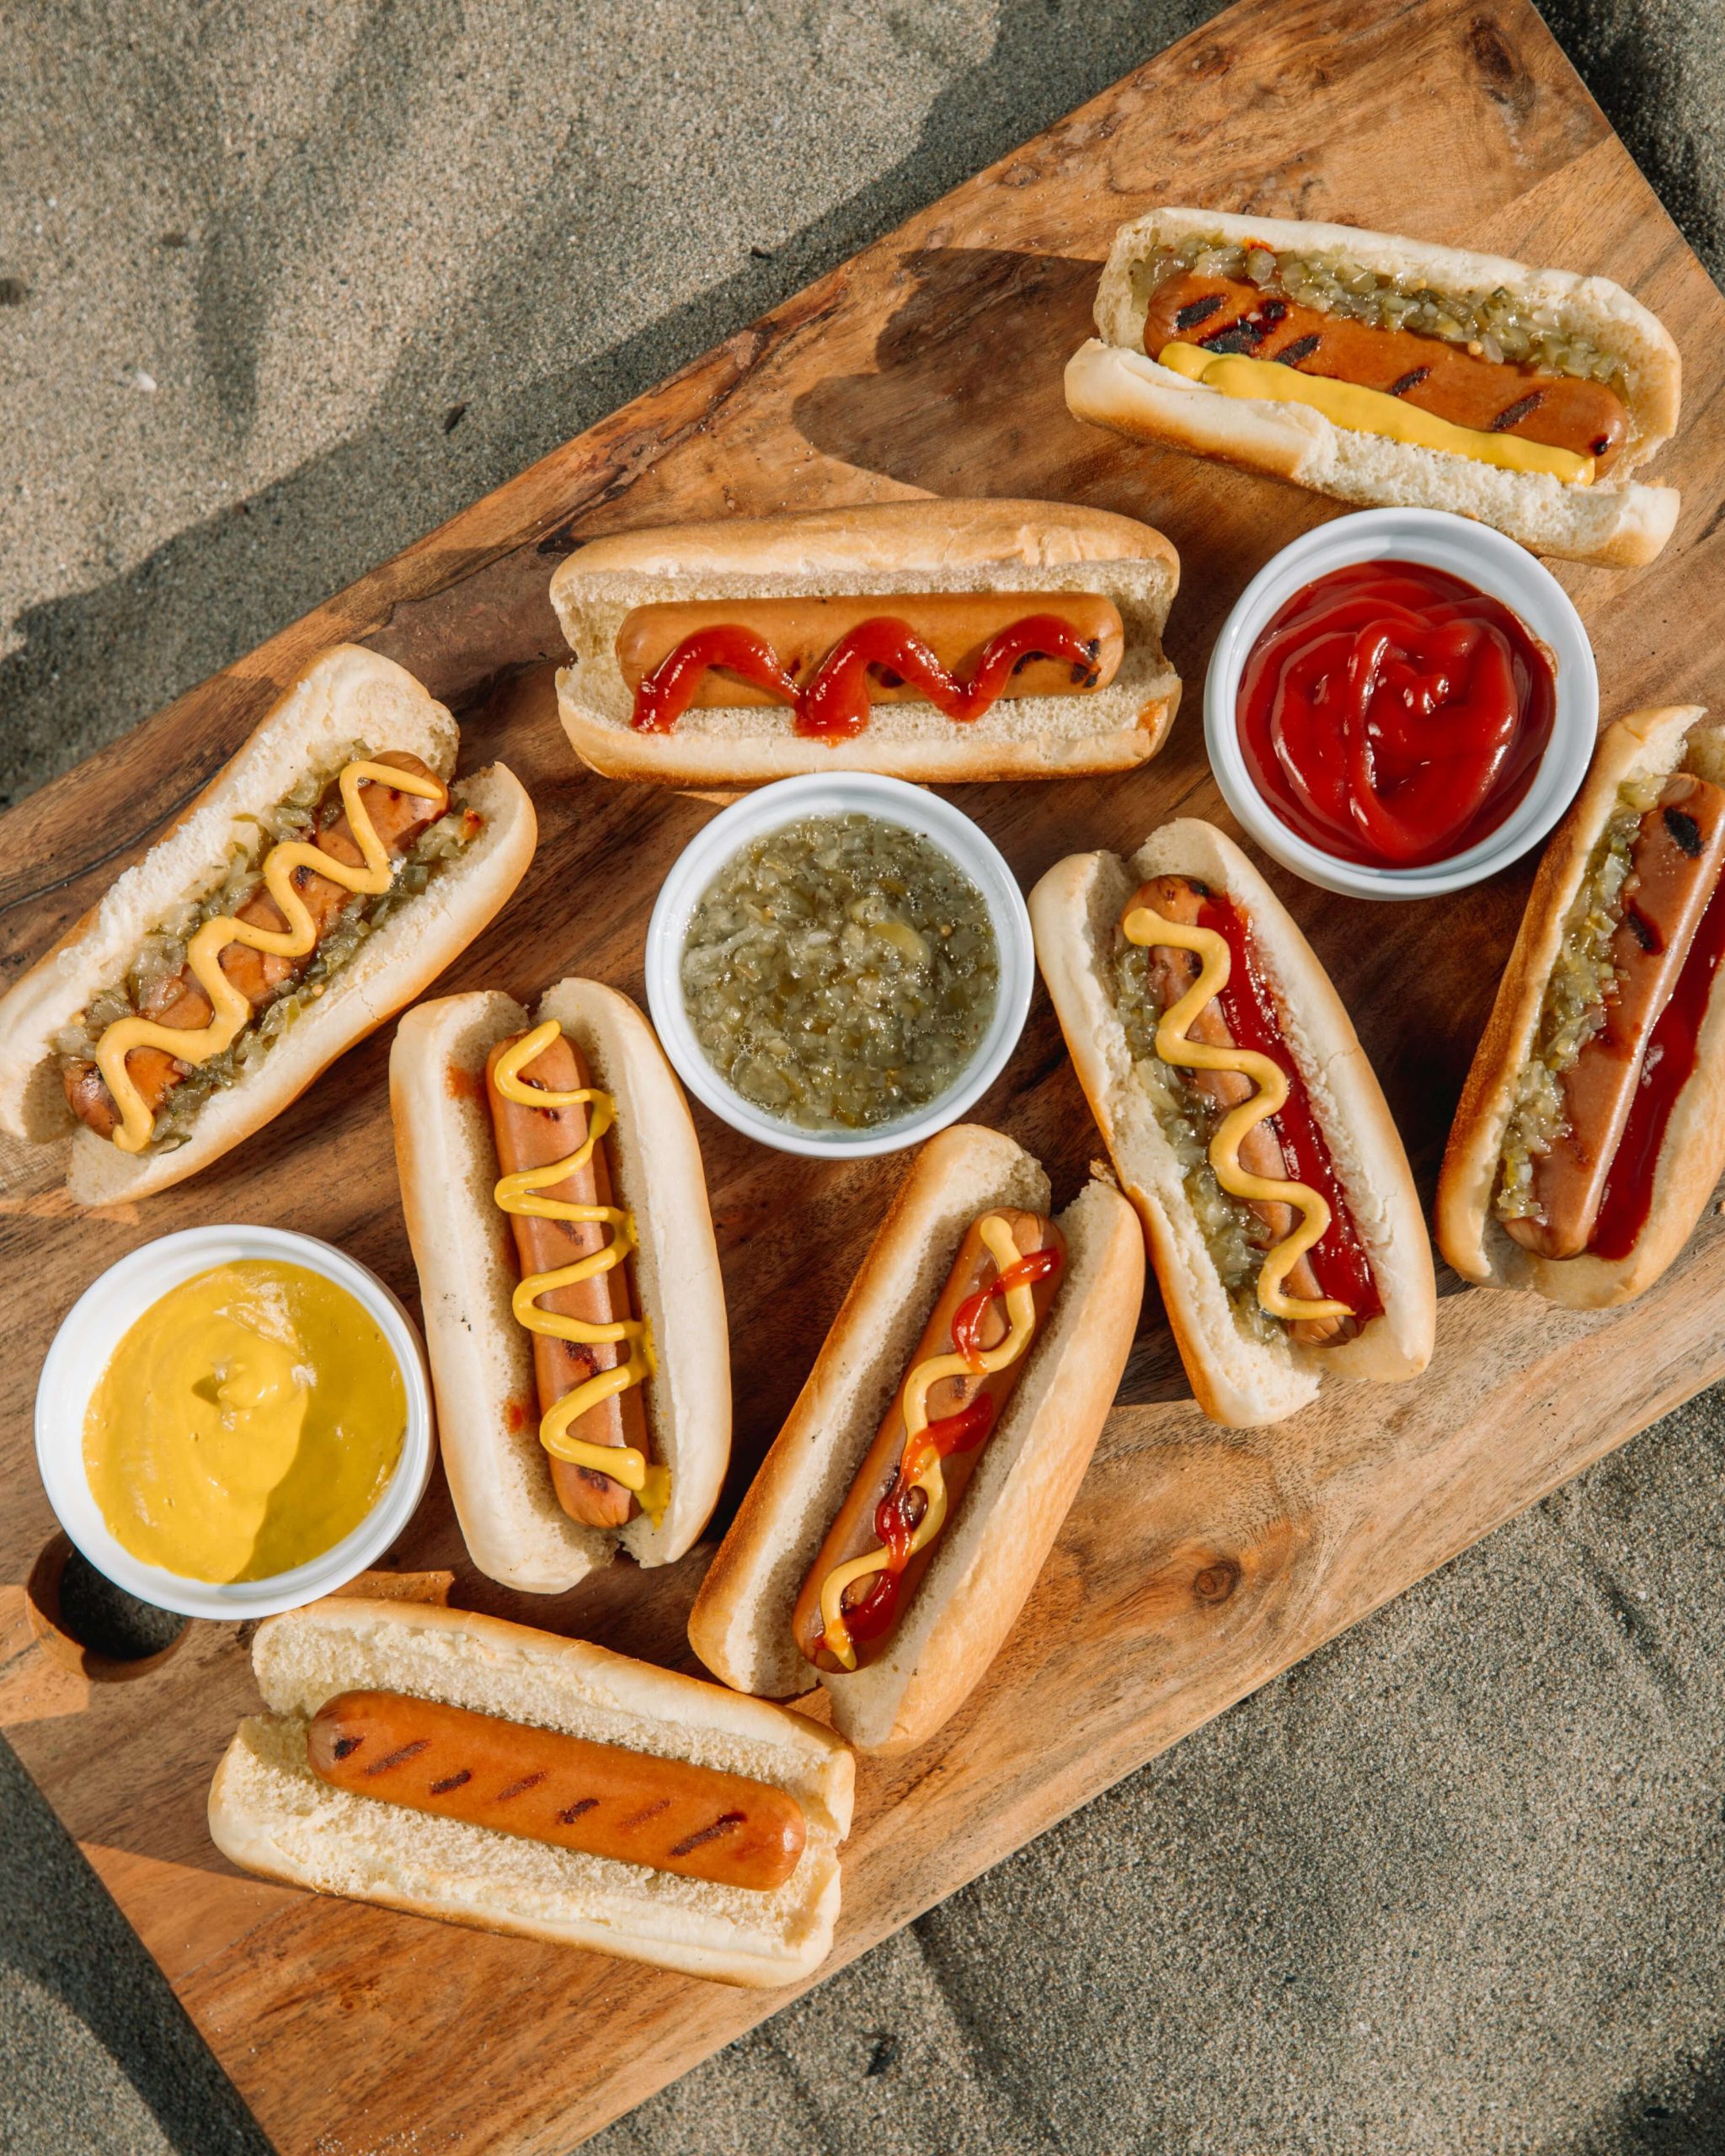 Best Places To Get Hot Dogs in New York